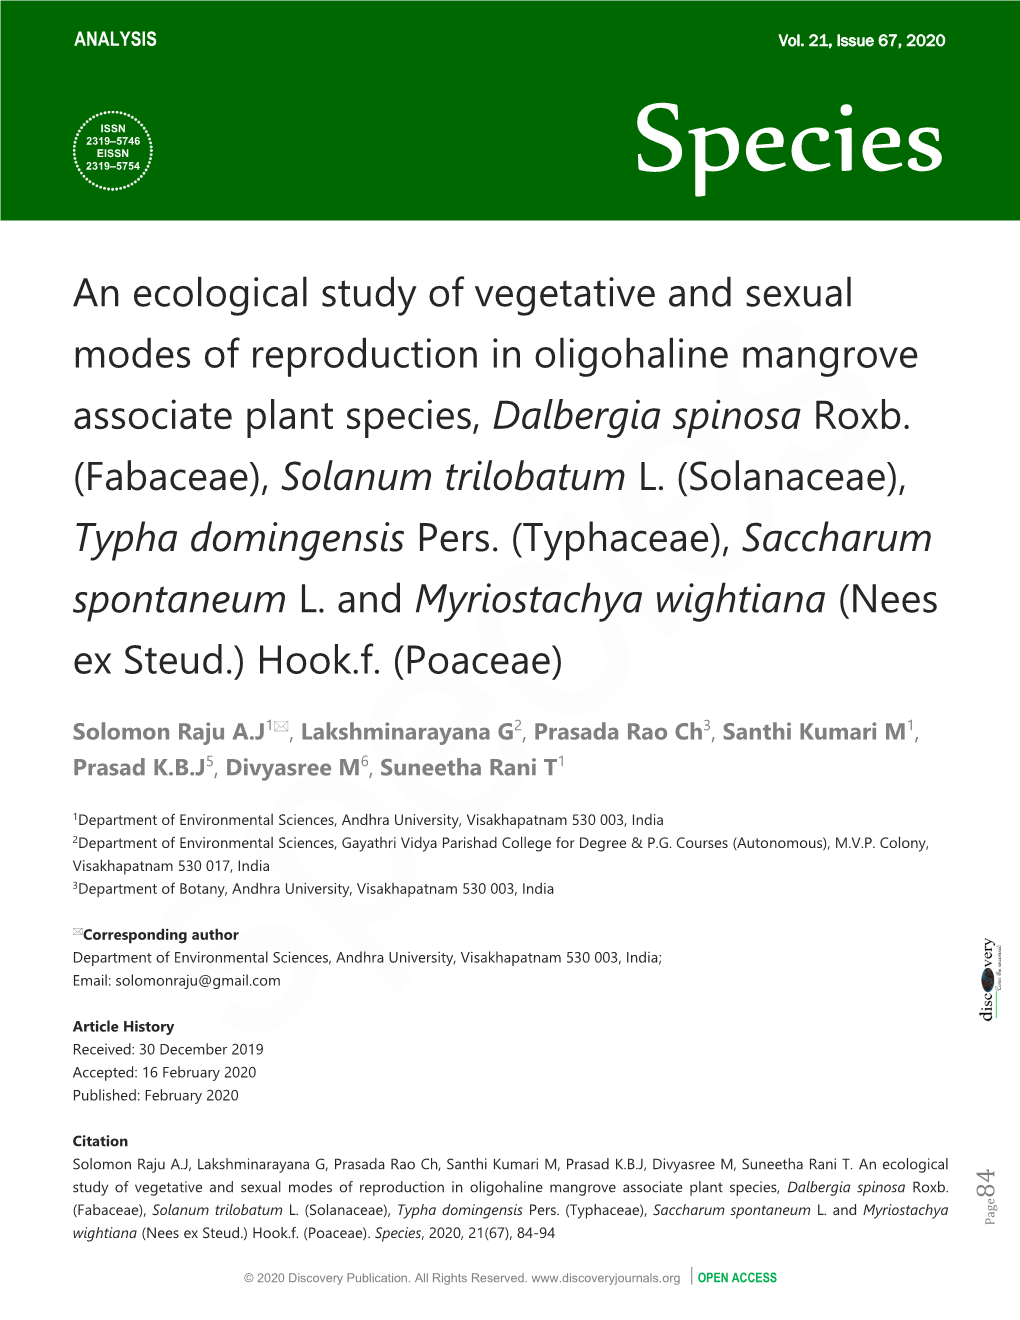 An Ecological Study of Vegetative and Sexual Modes of Reproduction in Oligohaline Mangrove Associate Plant Species, Dalbergia Spinosa Roxb